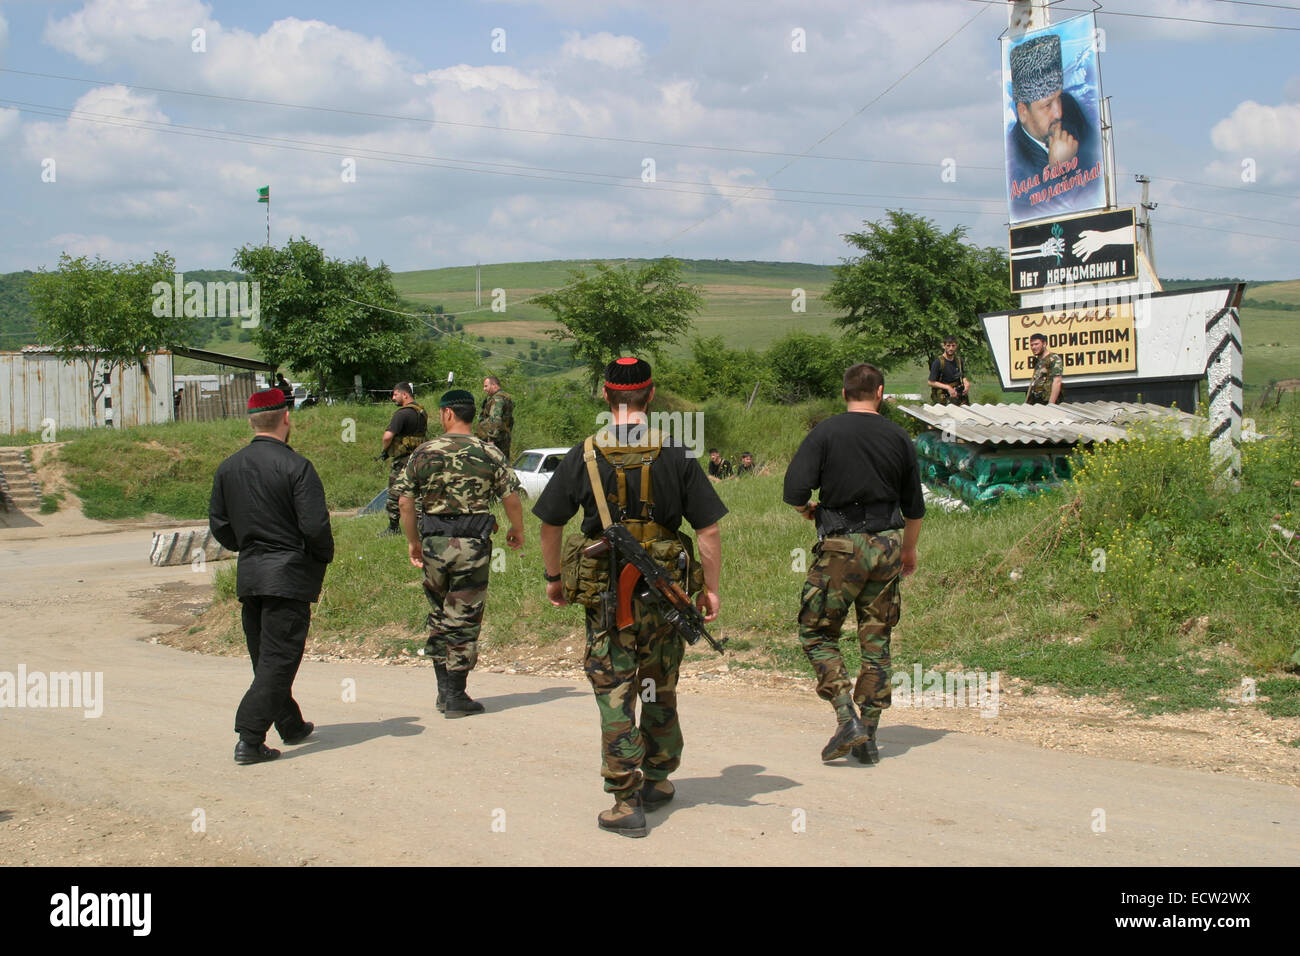 Chechen leader Ramzan Kadyrov, the later president, and several of his men at the entrance to the village of Tsentoroi, Chechnya, Russia. Stock Photo